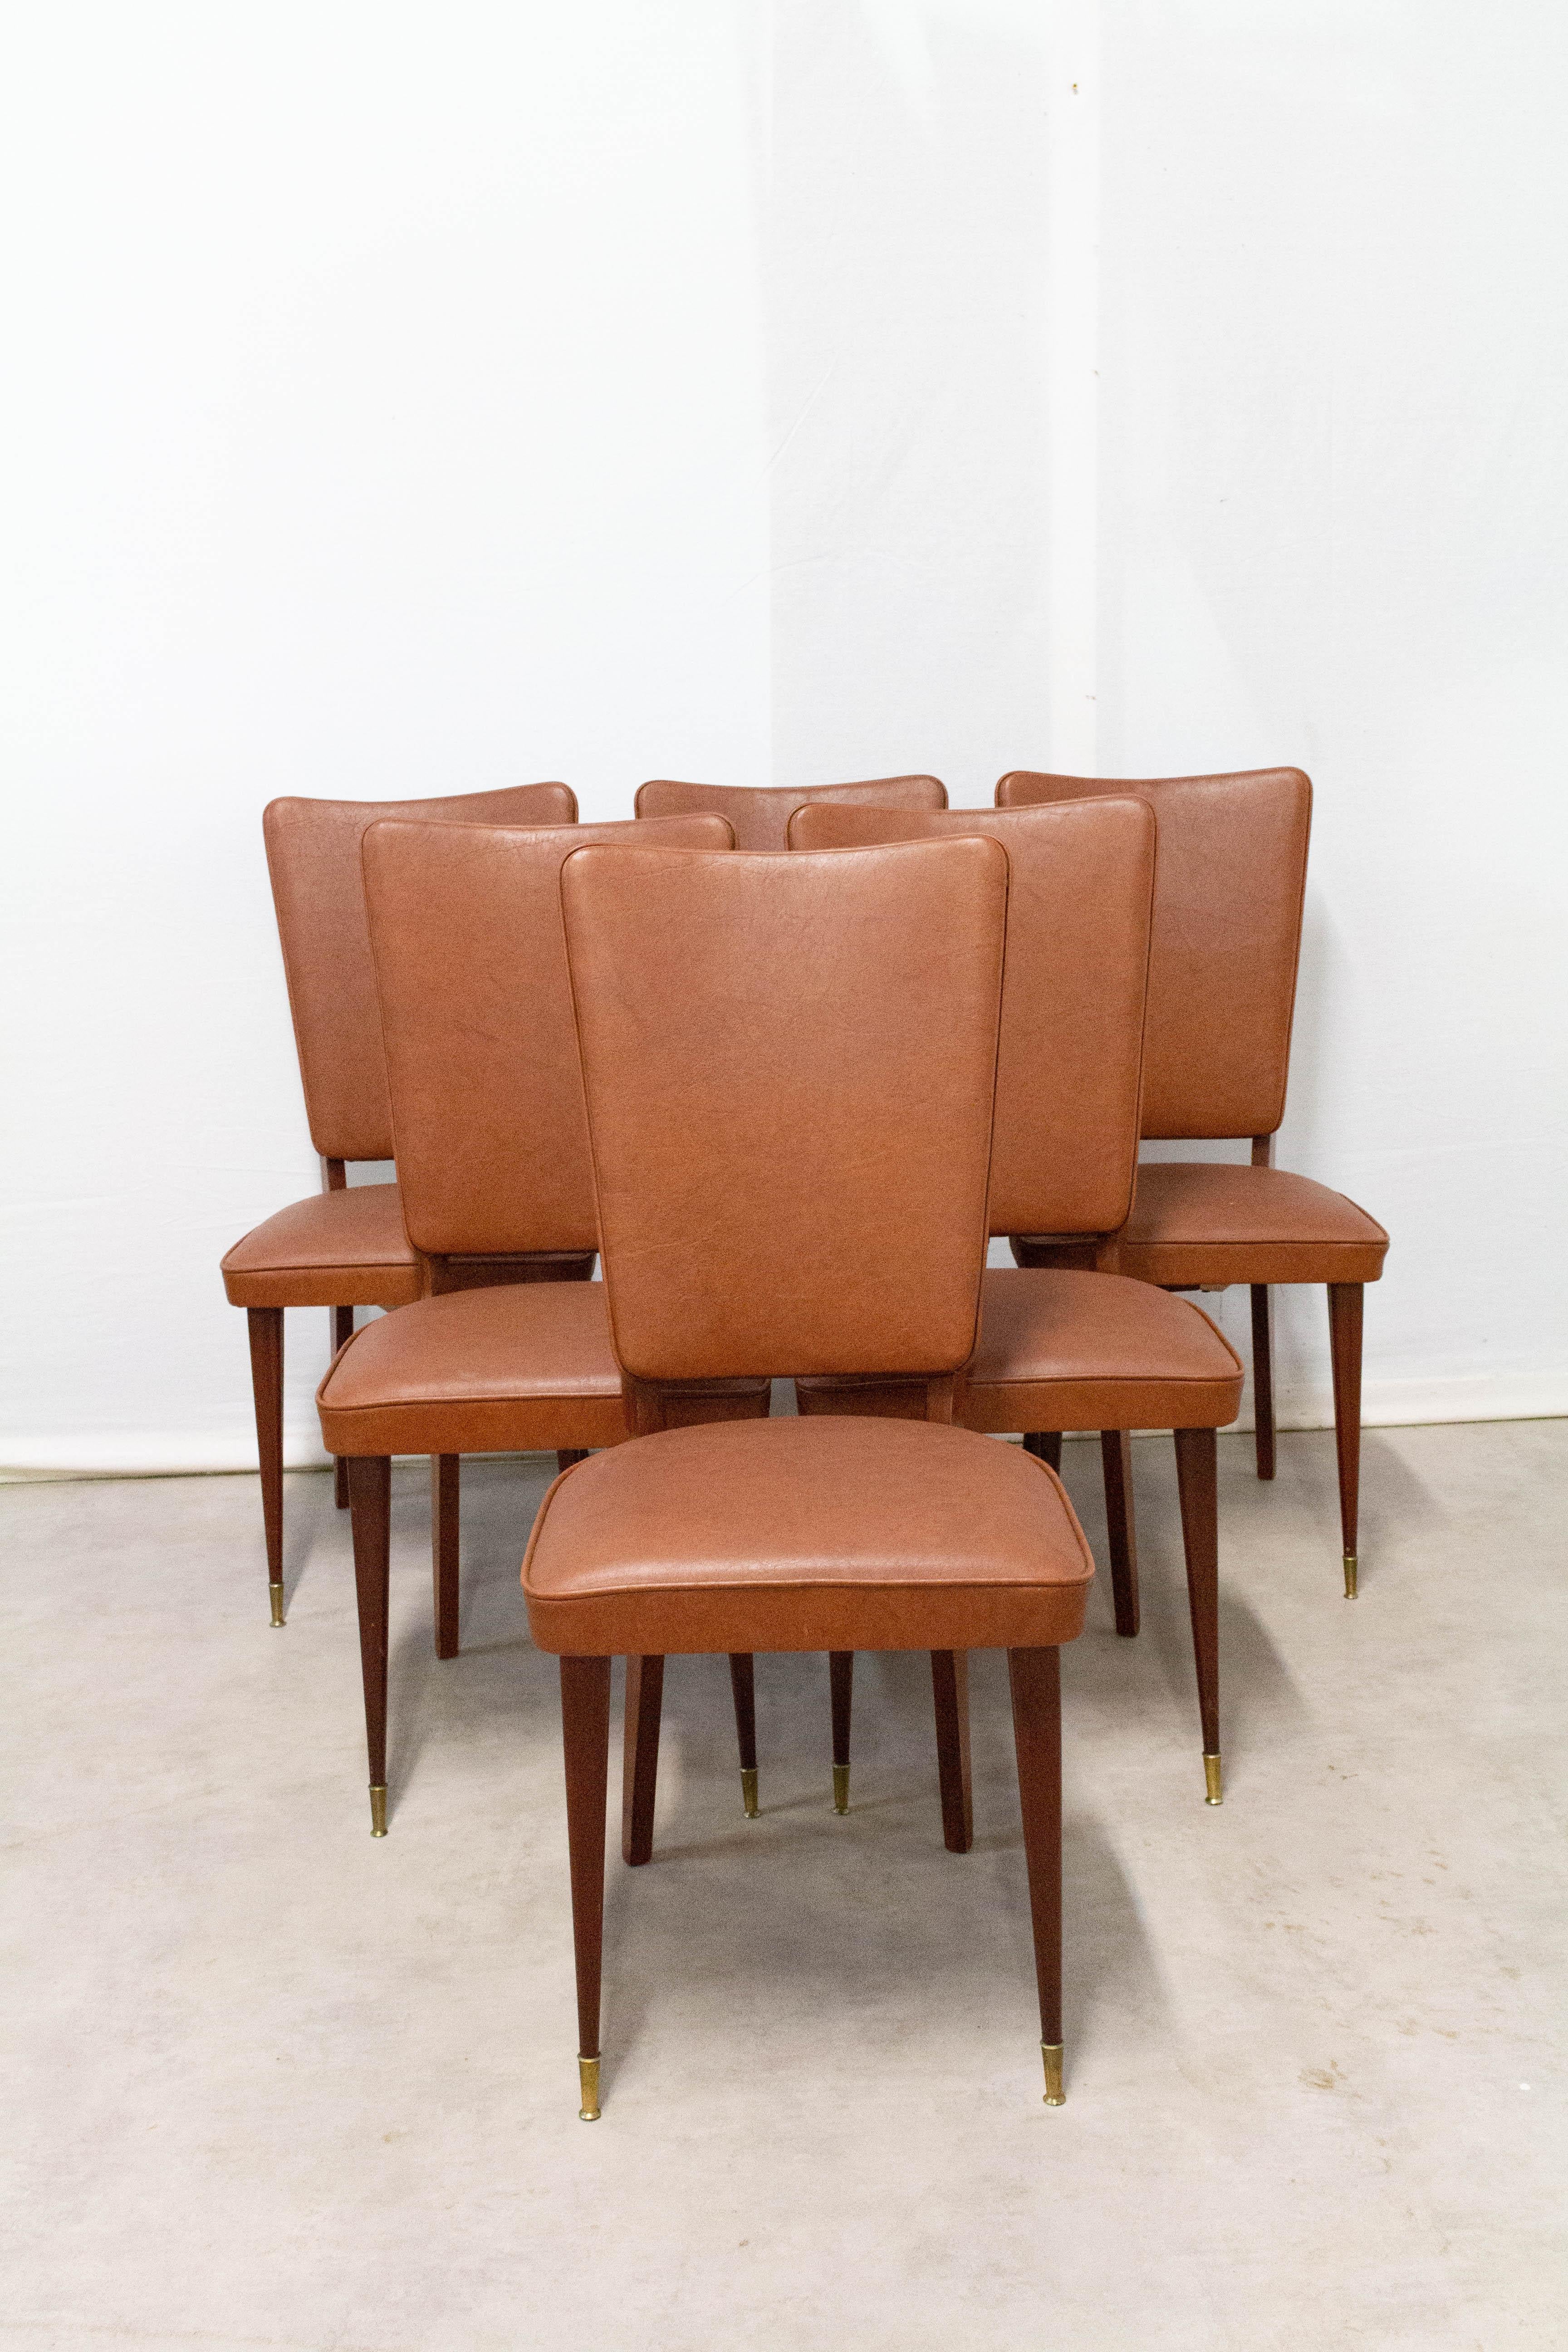 Six Midcentury Dining Chairs Brown Skai and Iroko Wood French, circa 1960 For Sale 7